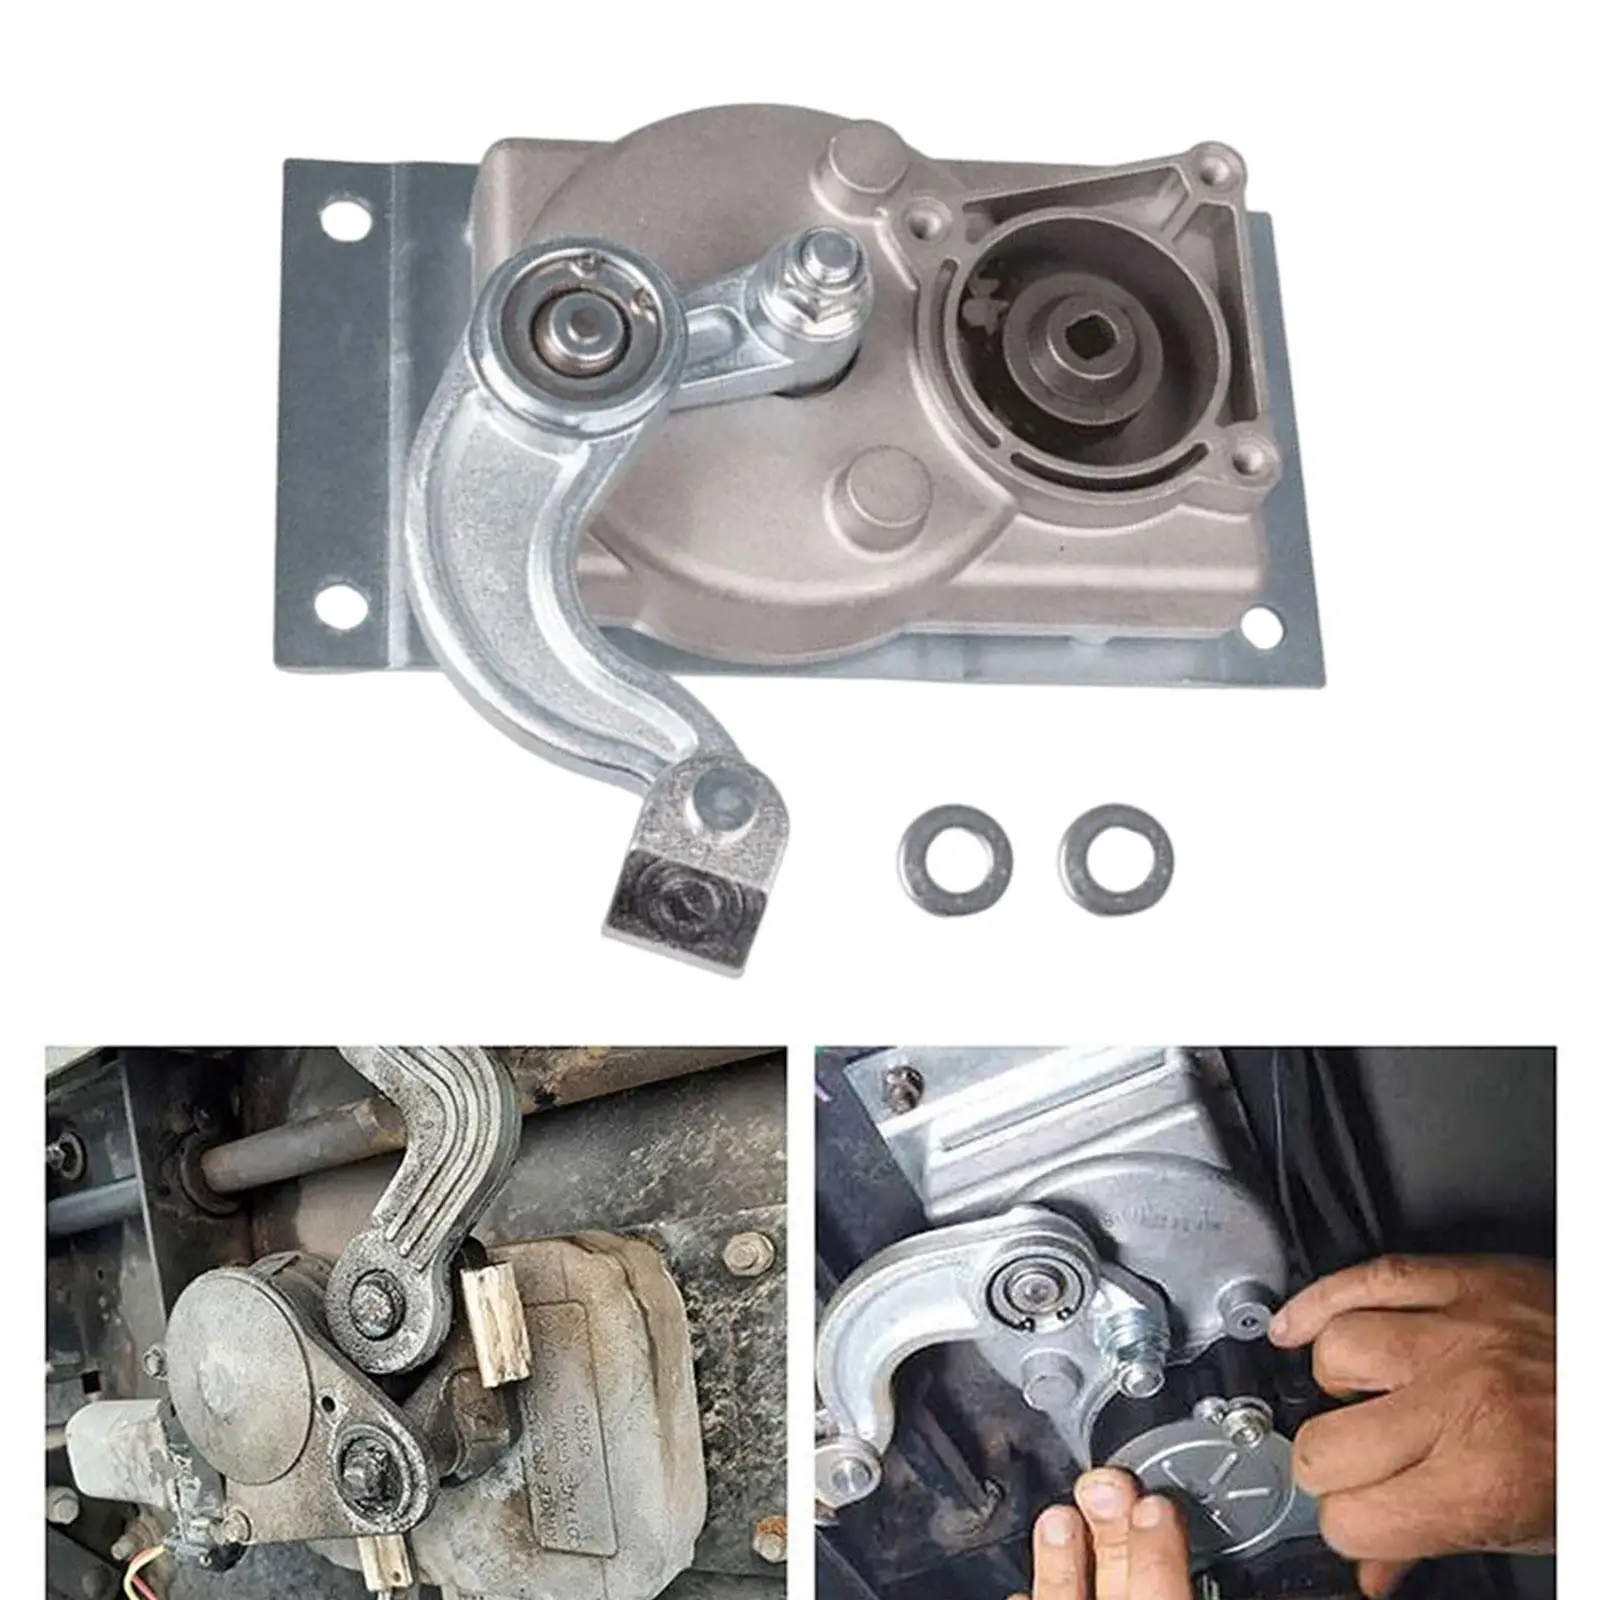 Motor Gear Box Linkage Easy Installation Gear Box Curved Linkage 379160 for Step Series 38 40 366043 22 23 28A 676061